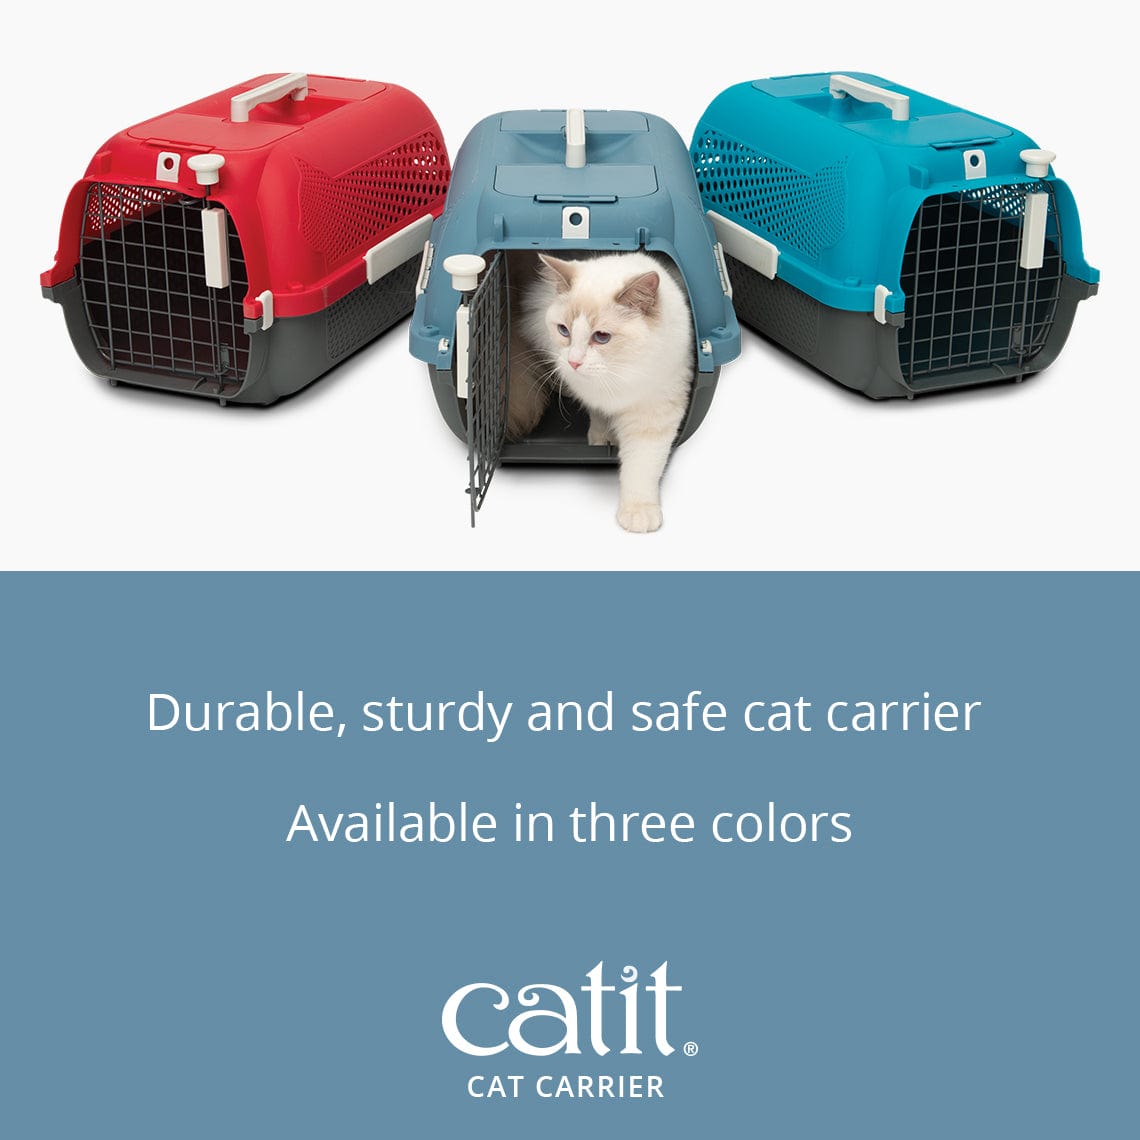 The Best Expert-Recommended Cat Carriers · The Wildest